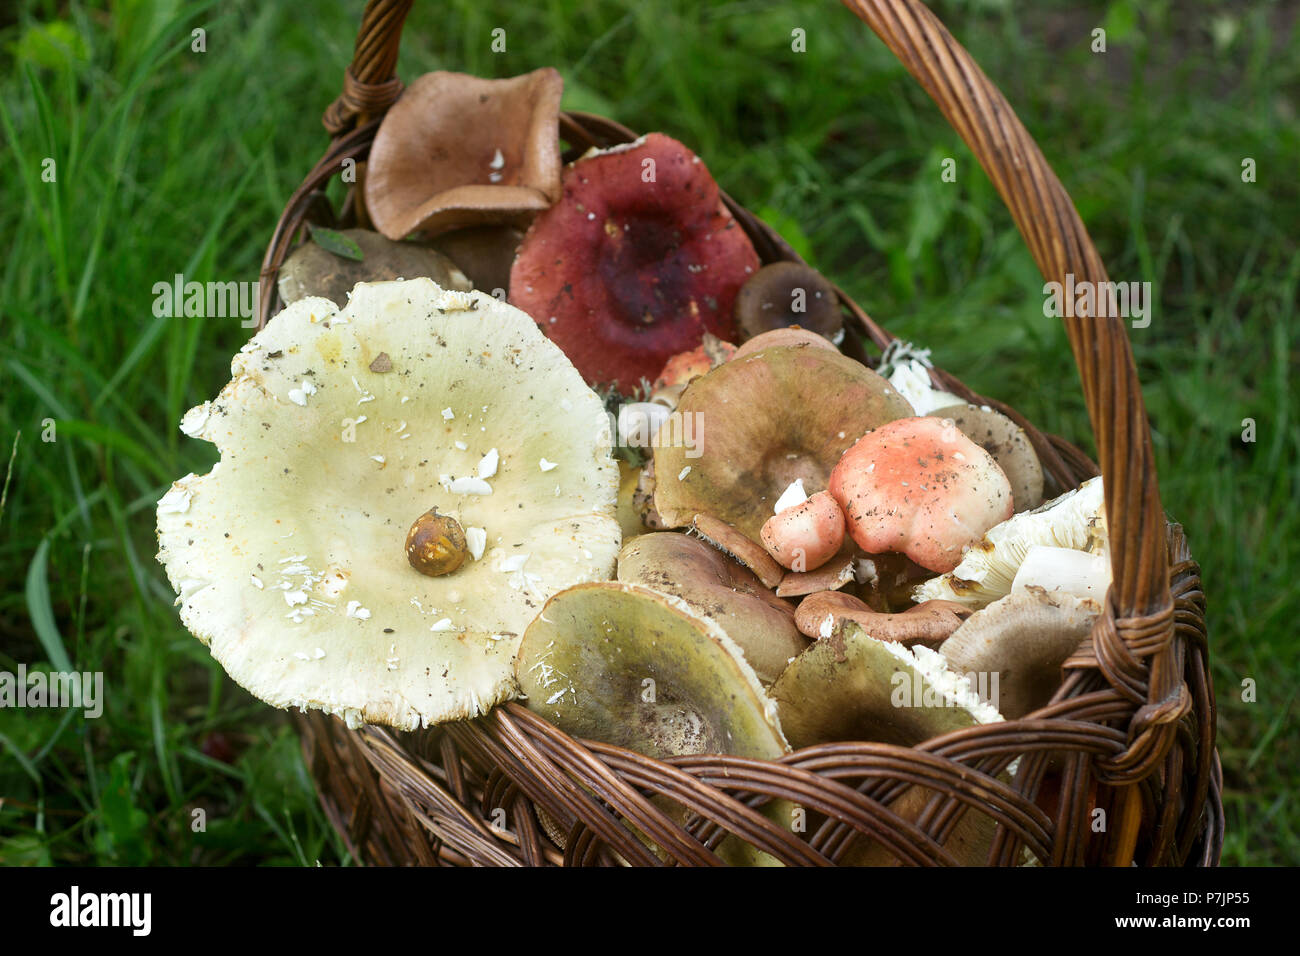 A full basket of summer forest mushrooms of different pastel tones against the background of a forest glade. Selective focus. Stock Photo